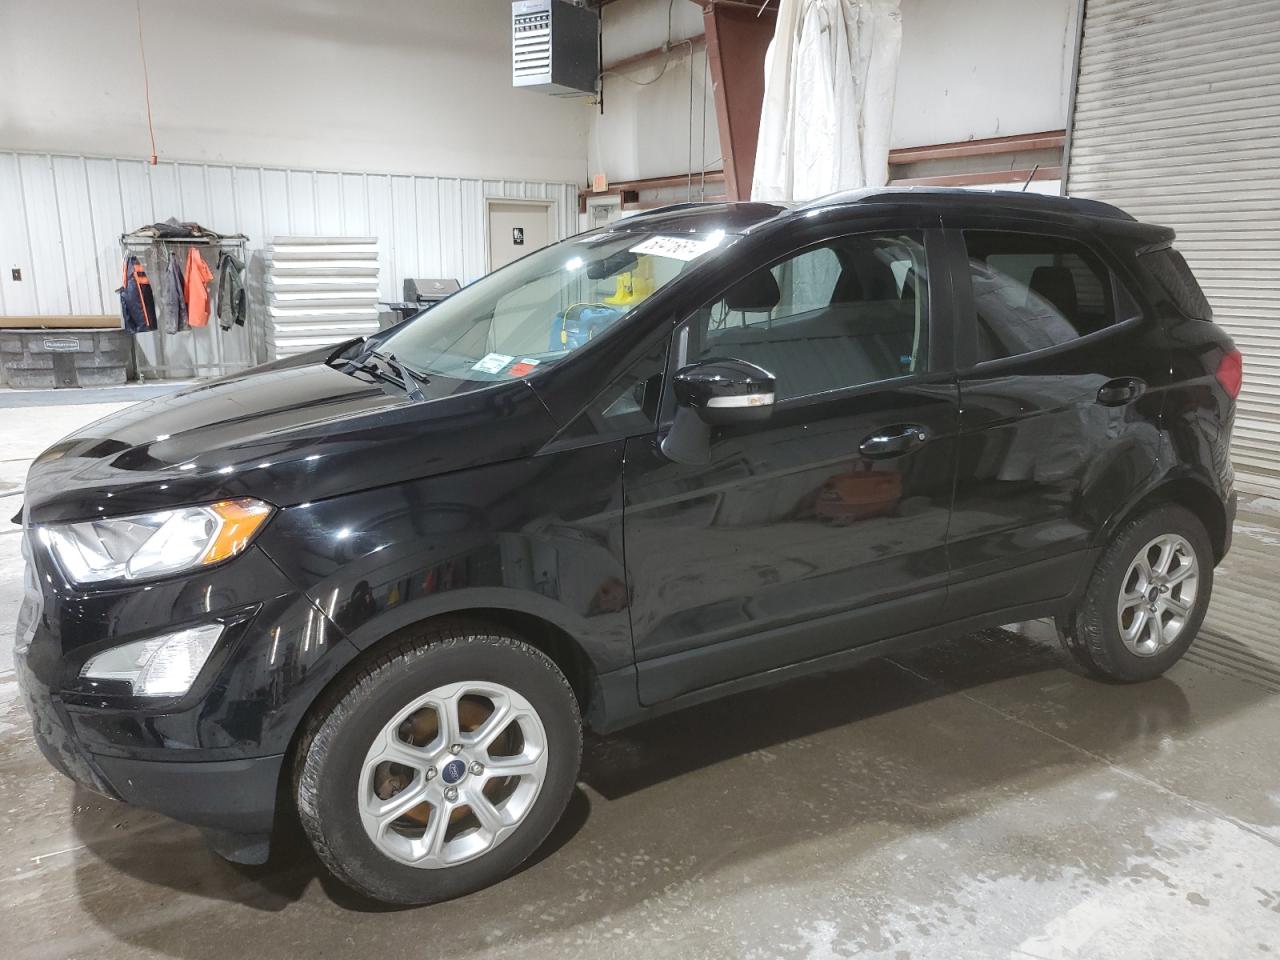 vin: MAJ3S2GE9KC270548 MAJ3S2GE9KC270548 2019 ford ecosport 1000 for Sale in 14482 1366, Ny - Rochester, Leroy, New York, USA